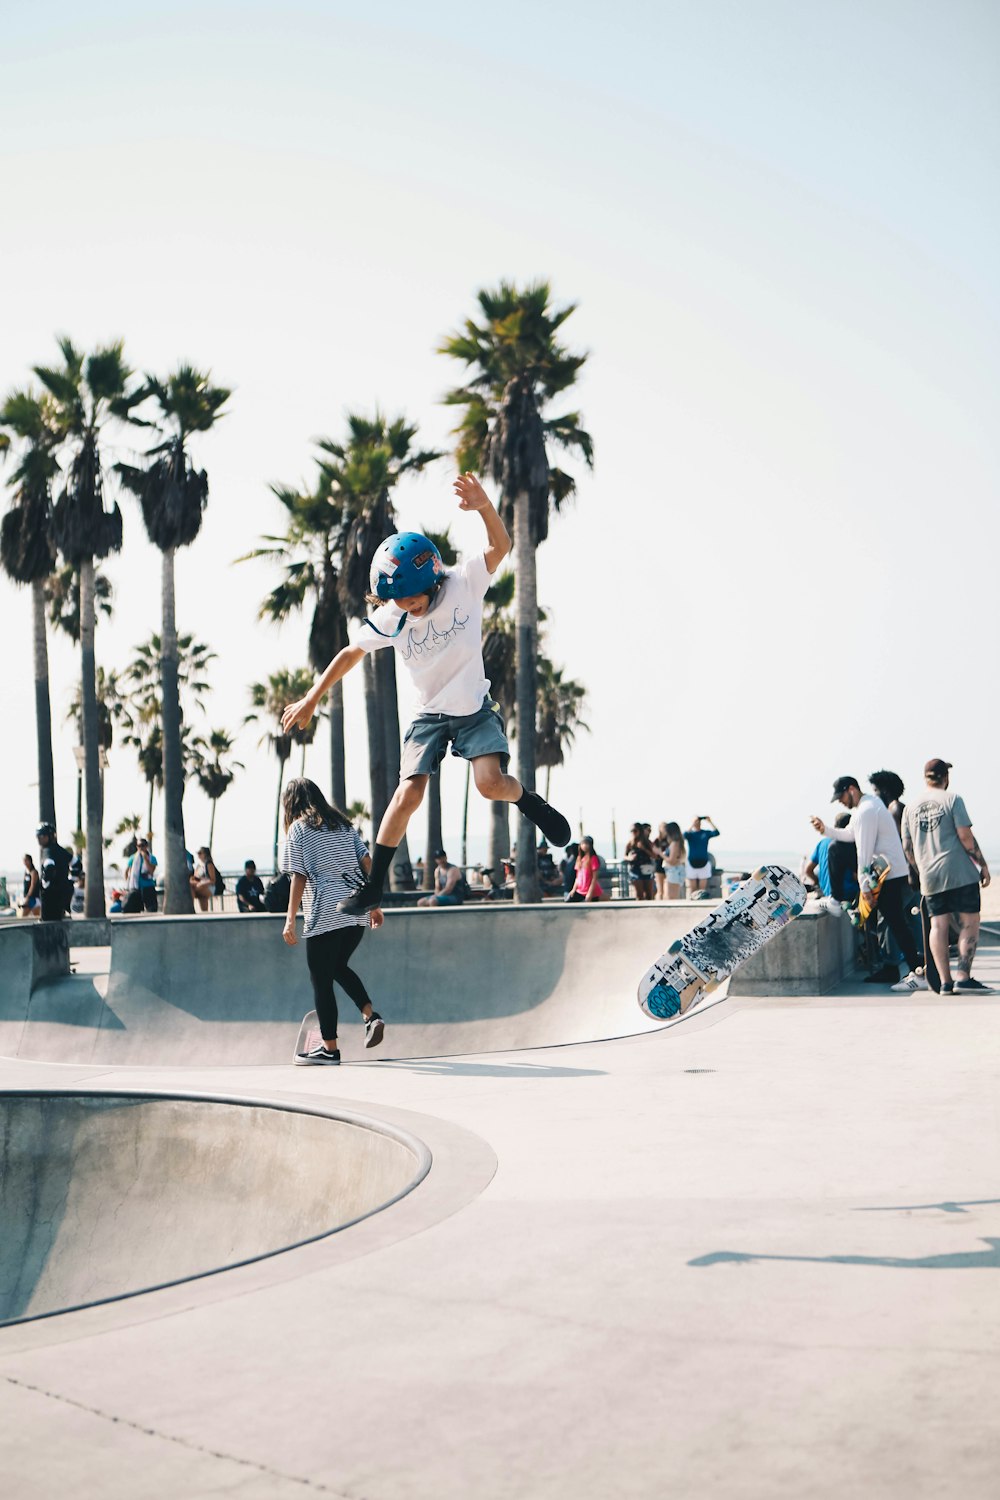 man in white t-shirt and black shorts playing skateboard